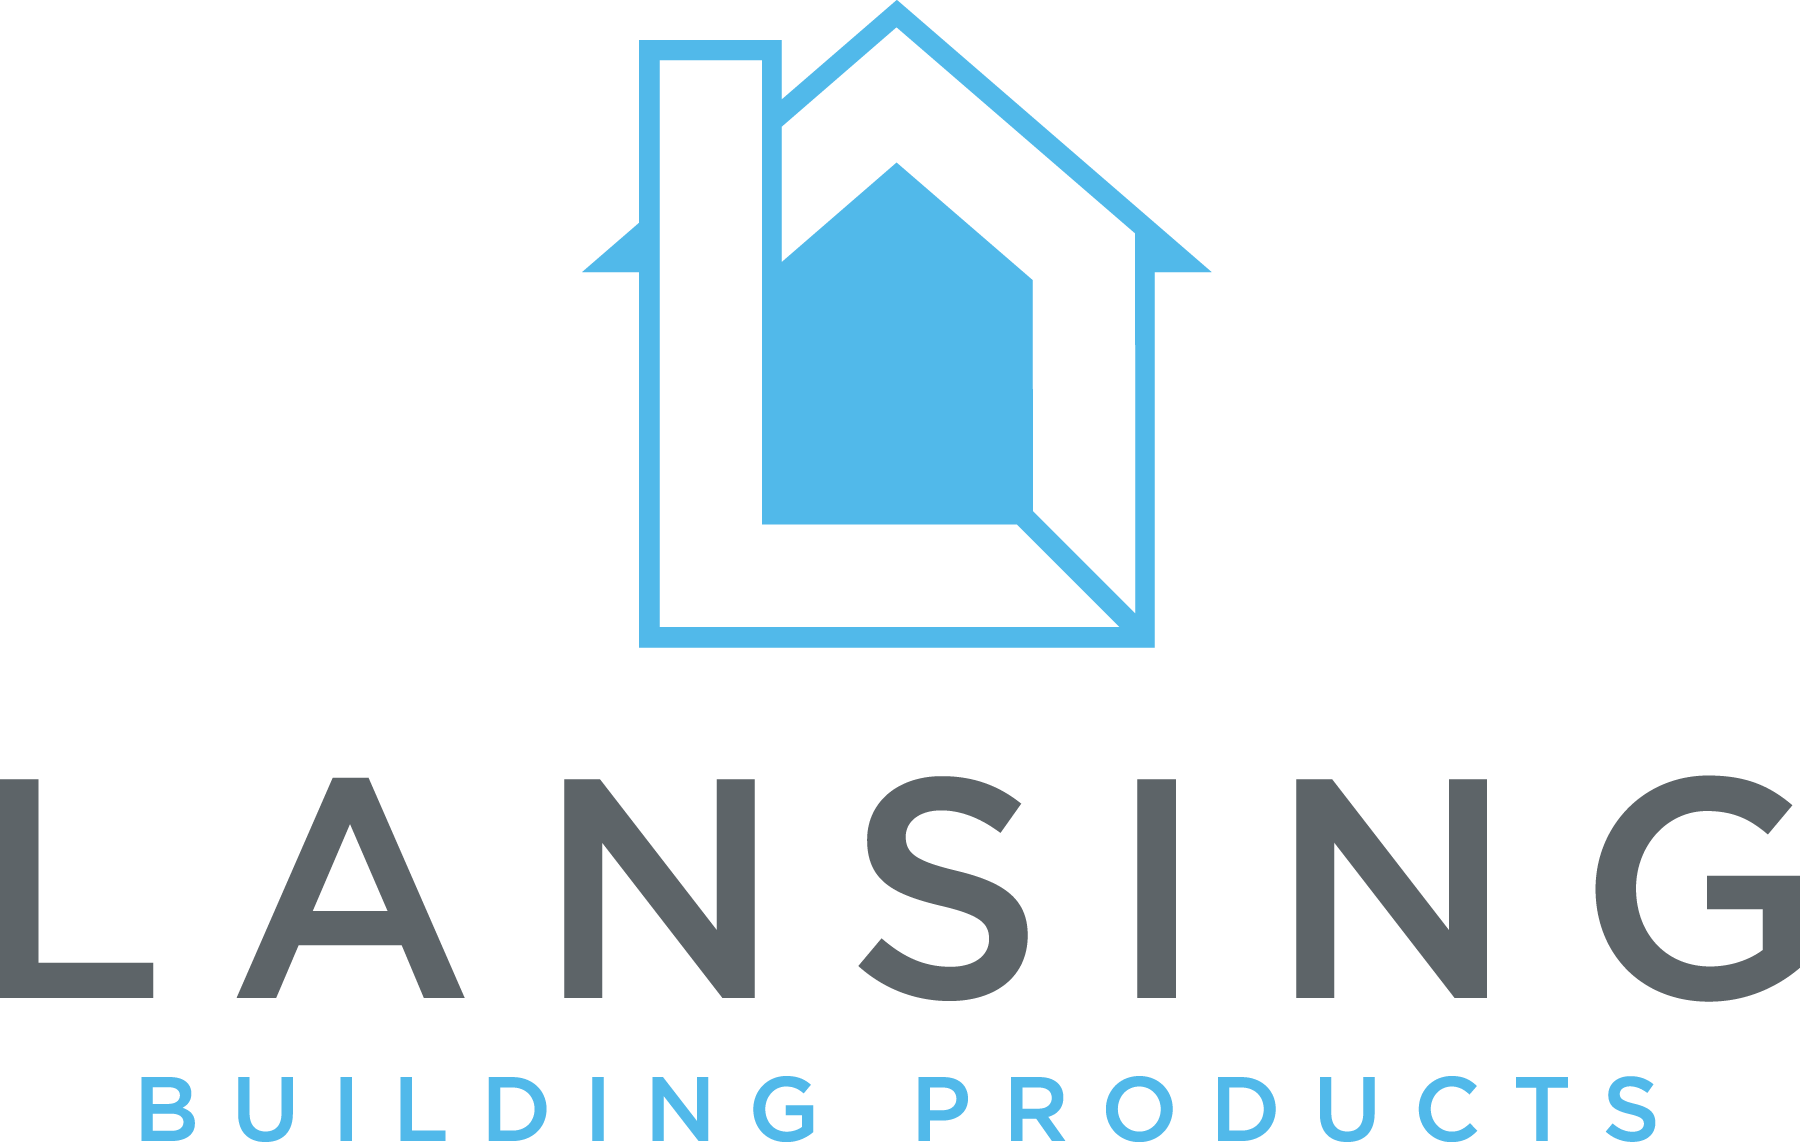 Learn more about Lansing Building Products